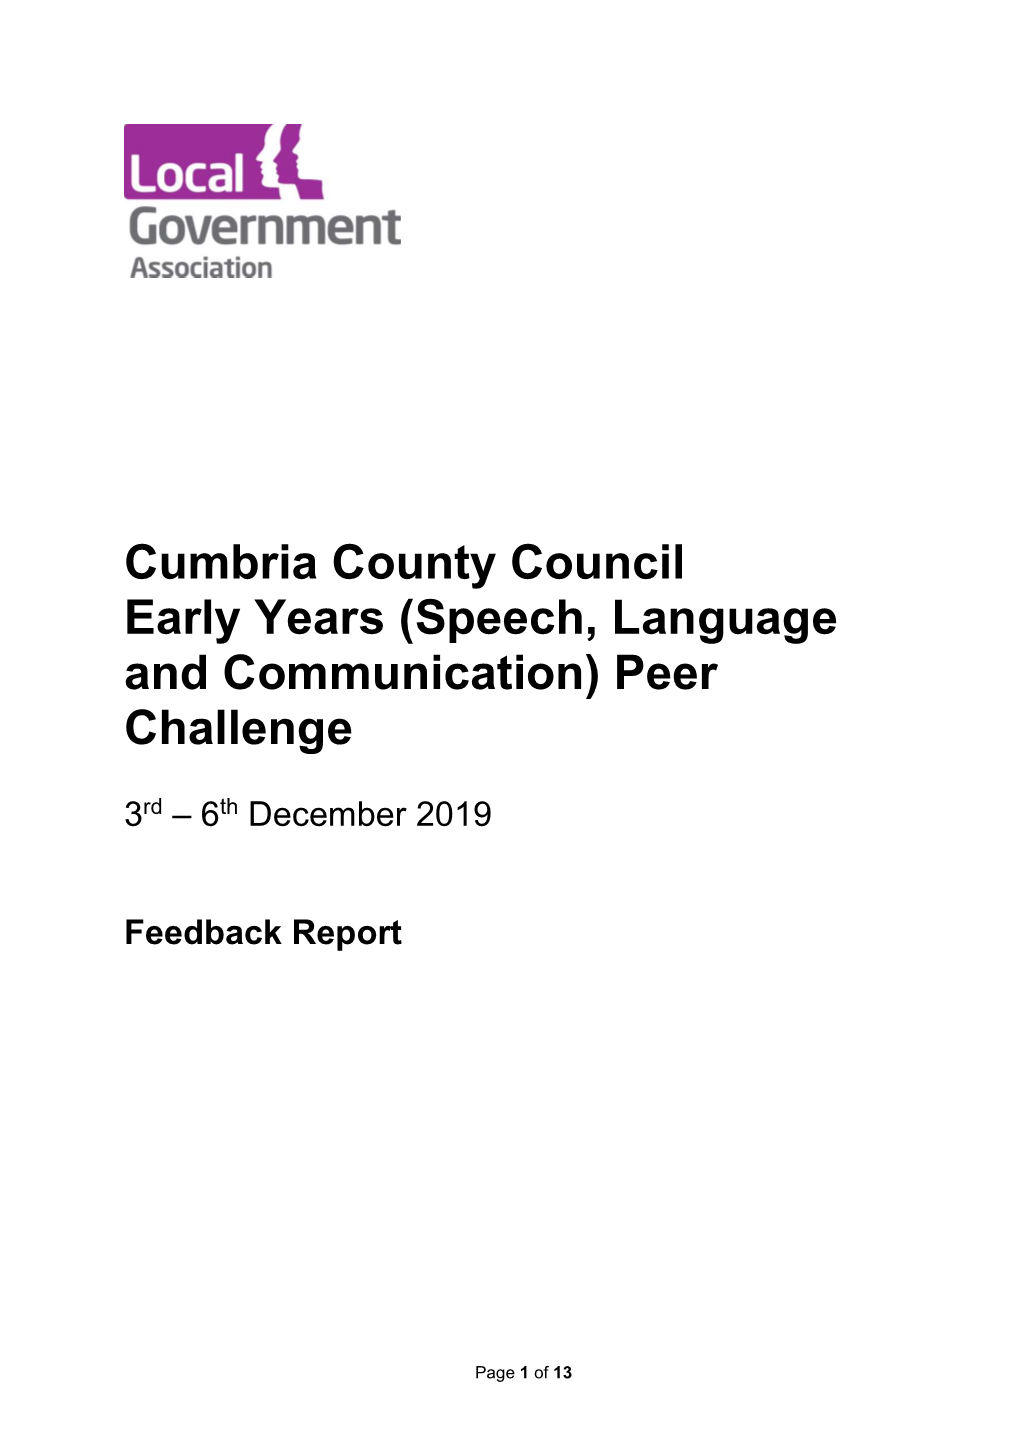 Cumbria County Council Early Years (Speech, Language and Communication) Peer Challenge